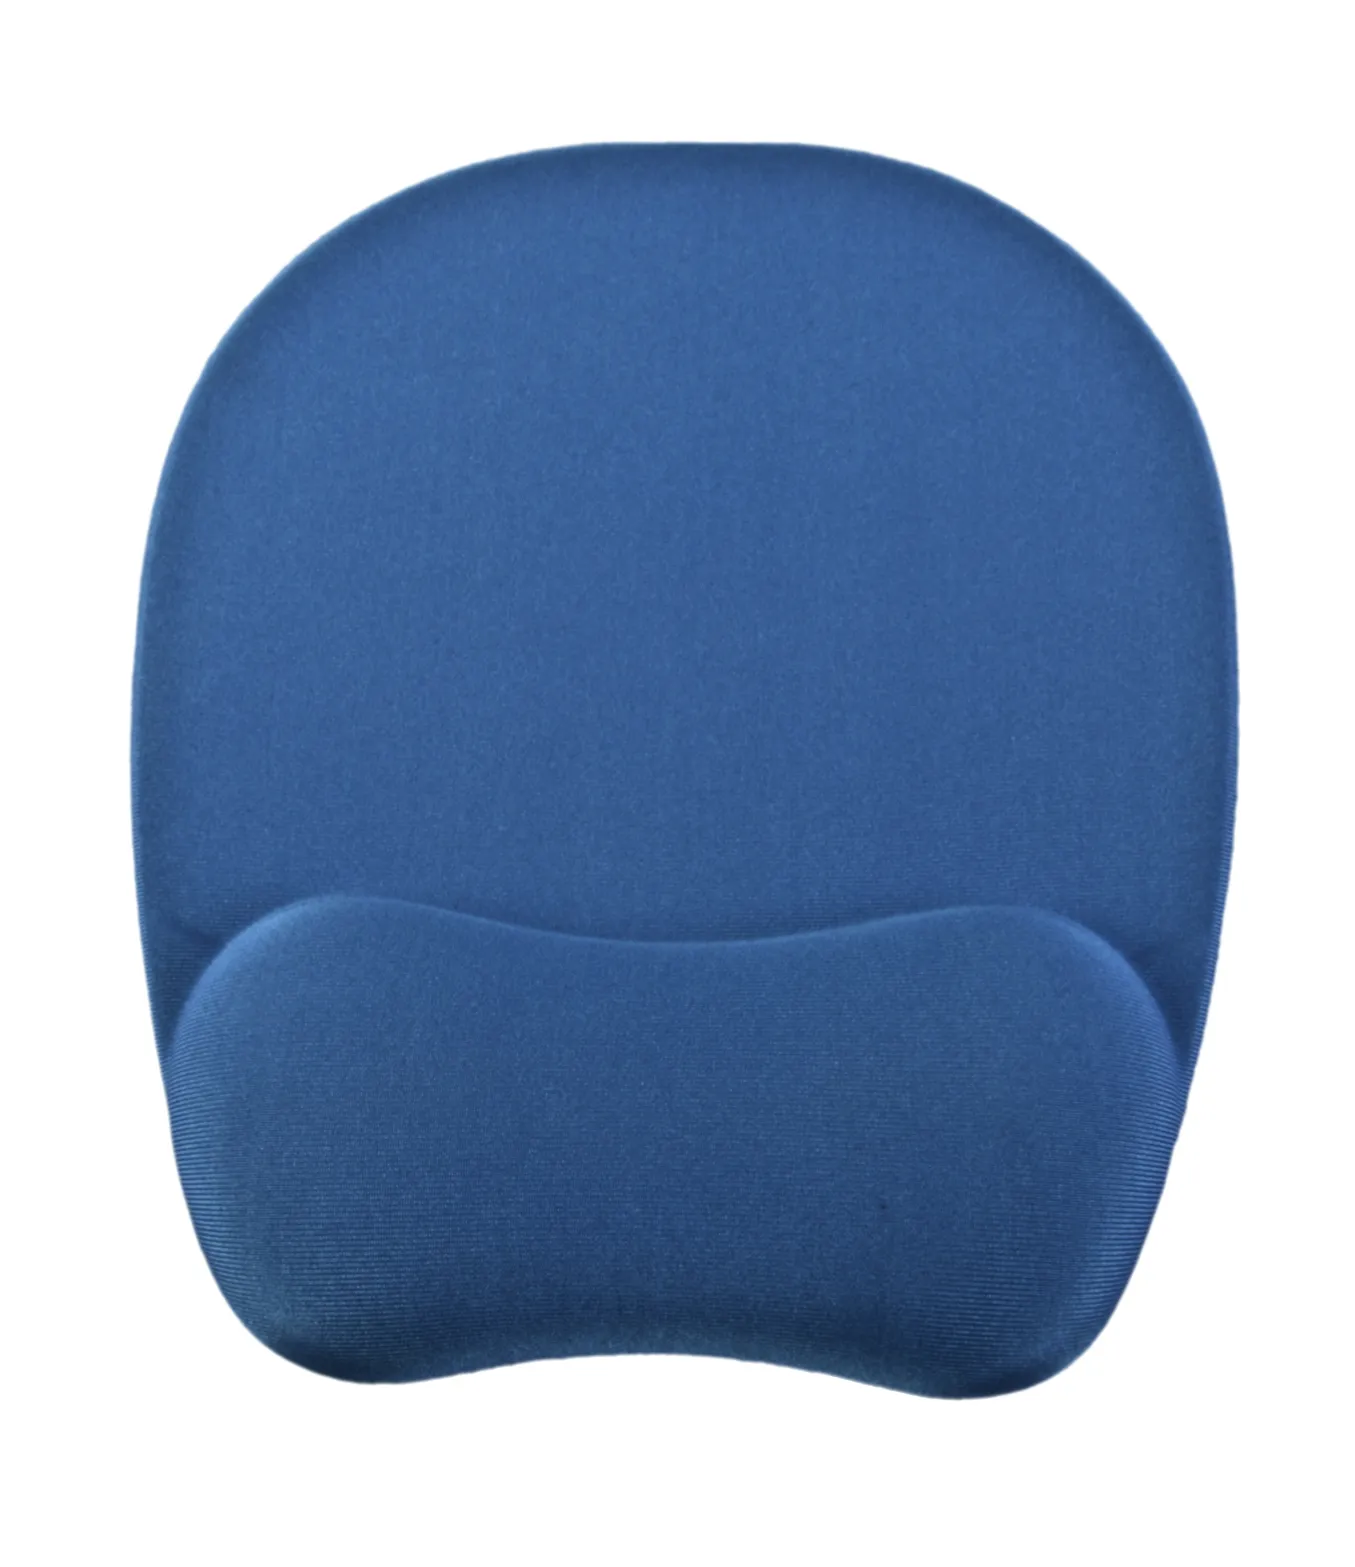 Super comfortable gel wrist cushion mousepad for Easy Typing Premium mouse mats with hand rest